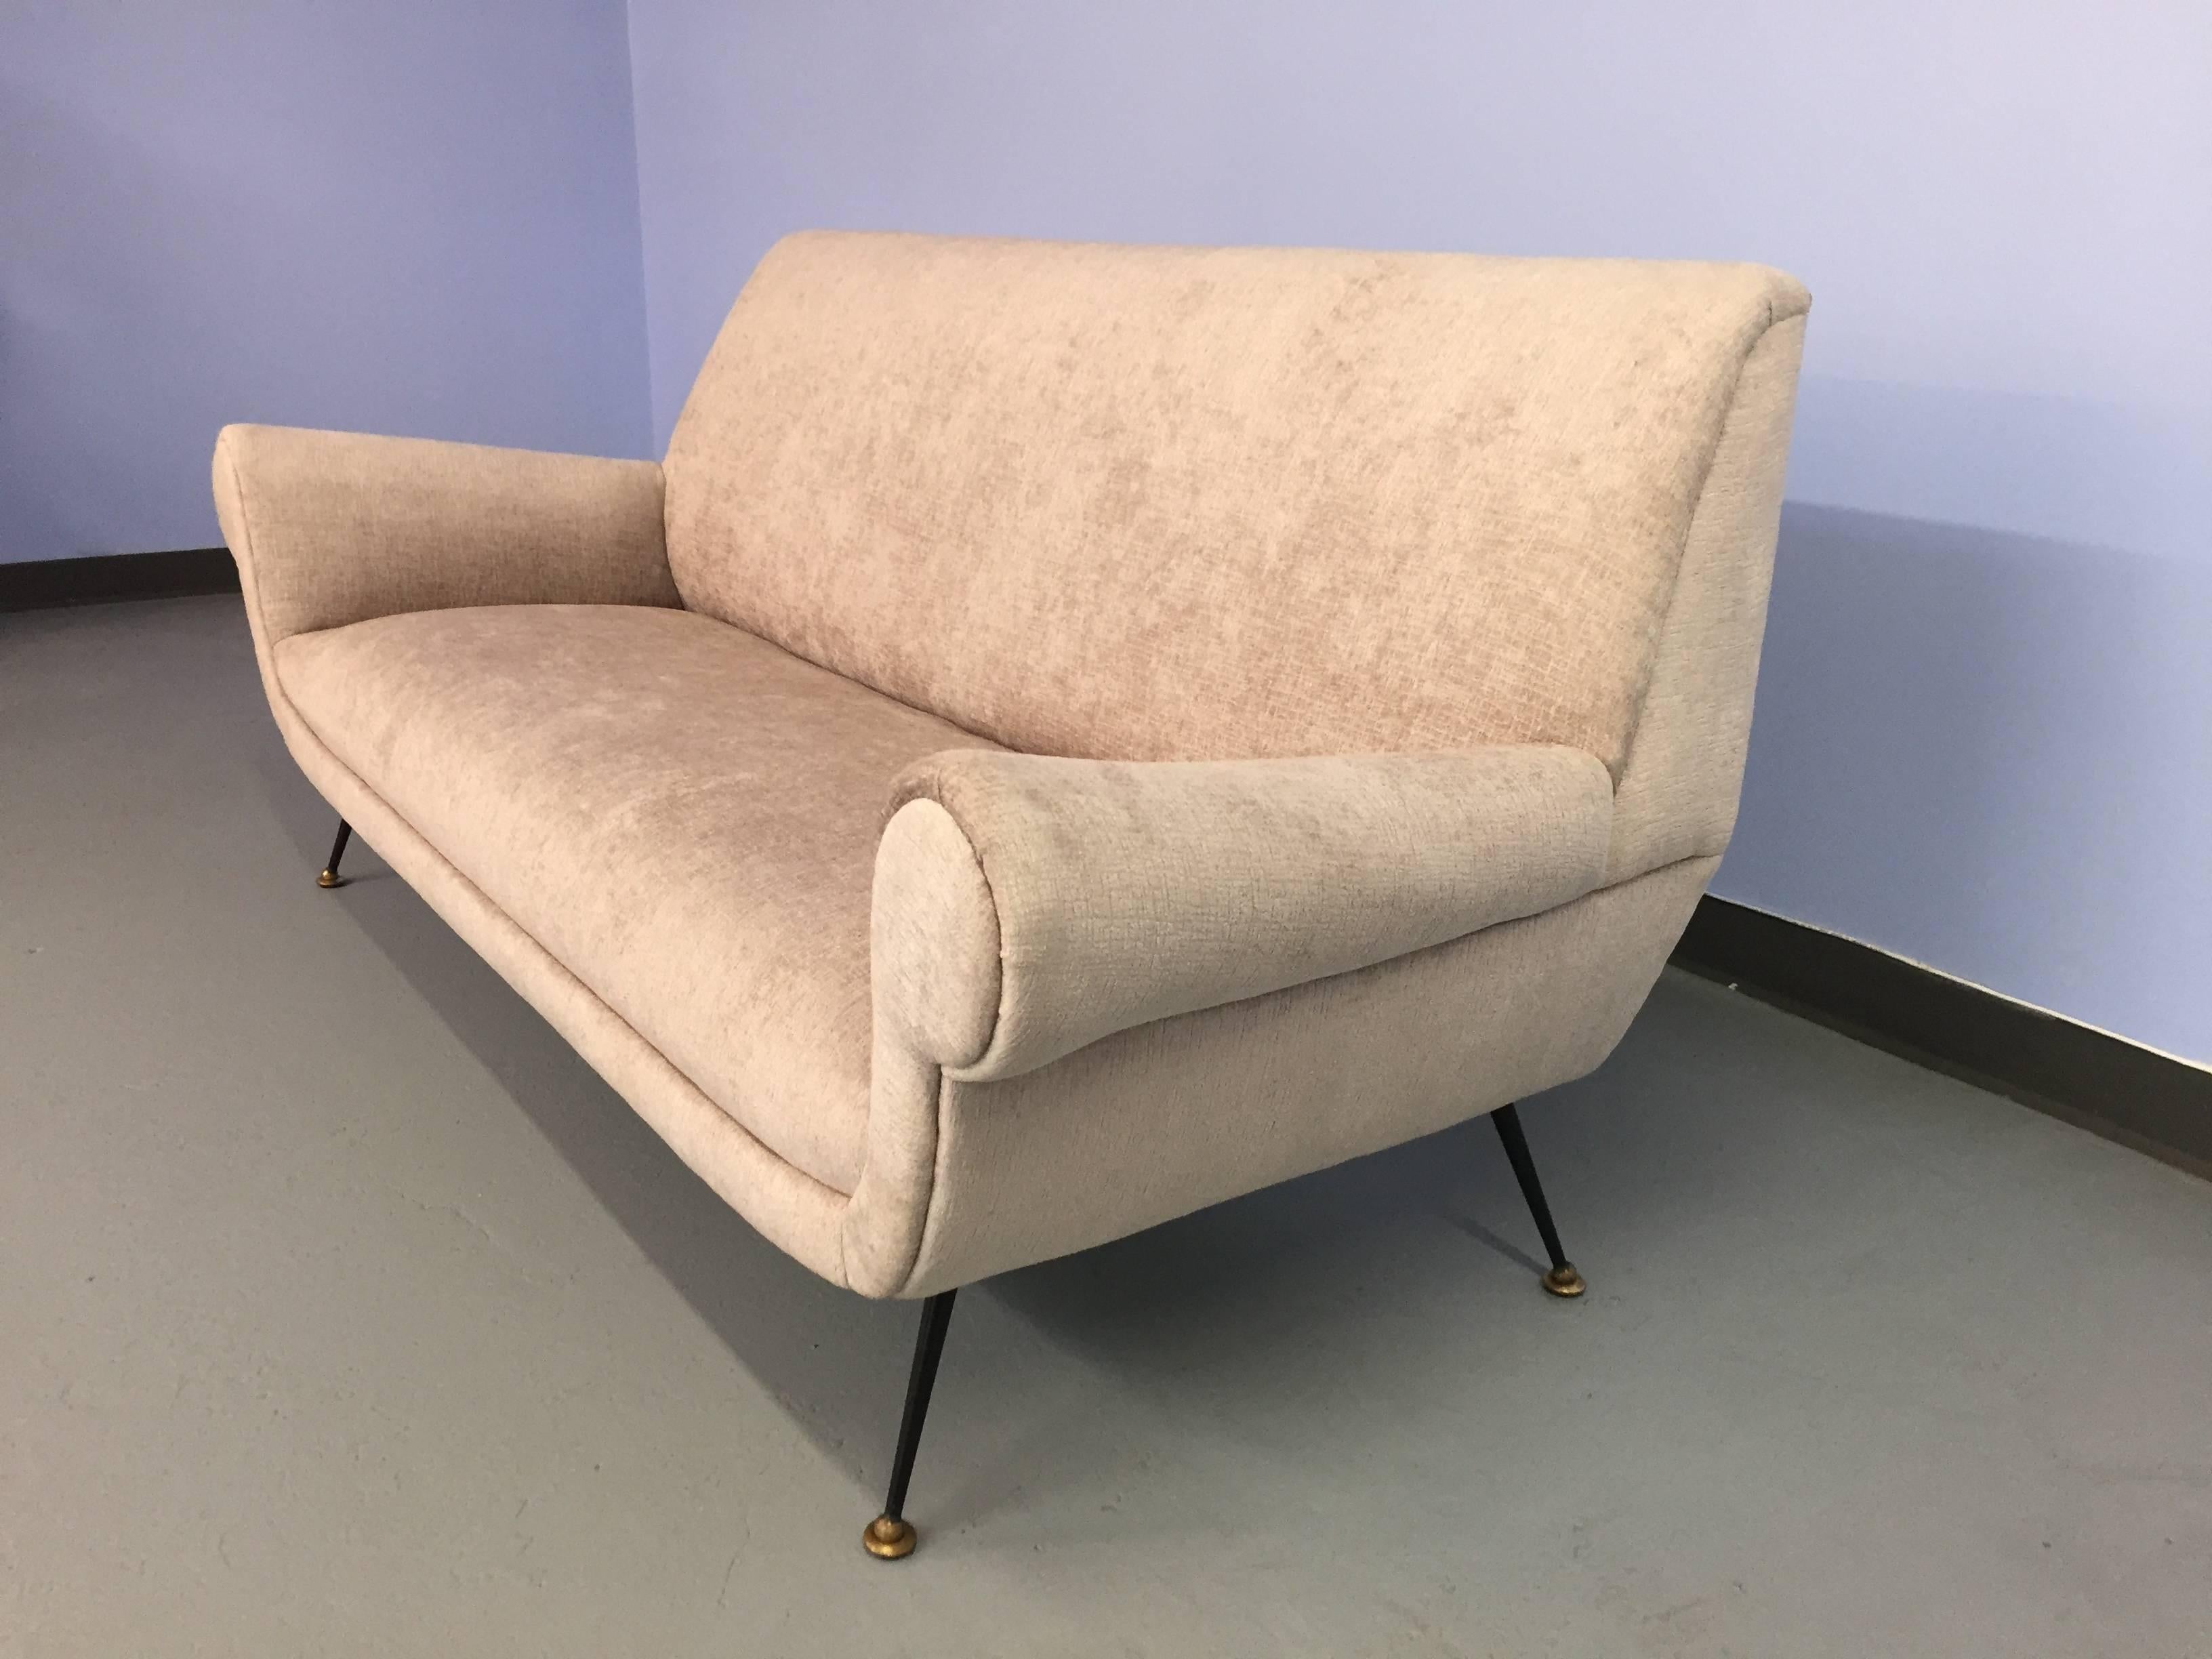 Newly upholstered in light grey velour with cross-hatched patterning. The side profile of this sofa is particularly striking, with sharp, angular lines. Other details include the distinctive legs, teared and black, tipped in brass ball and plate.